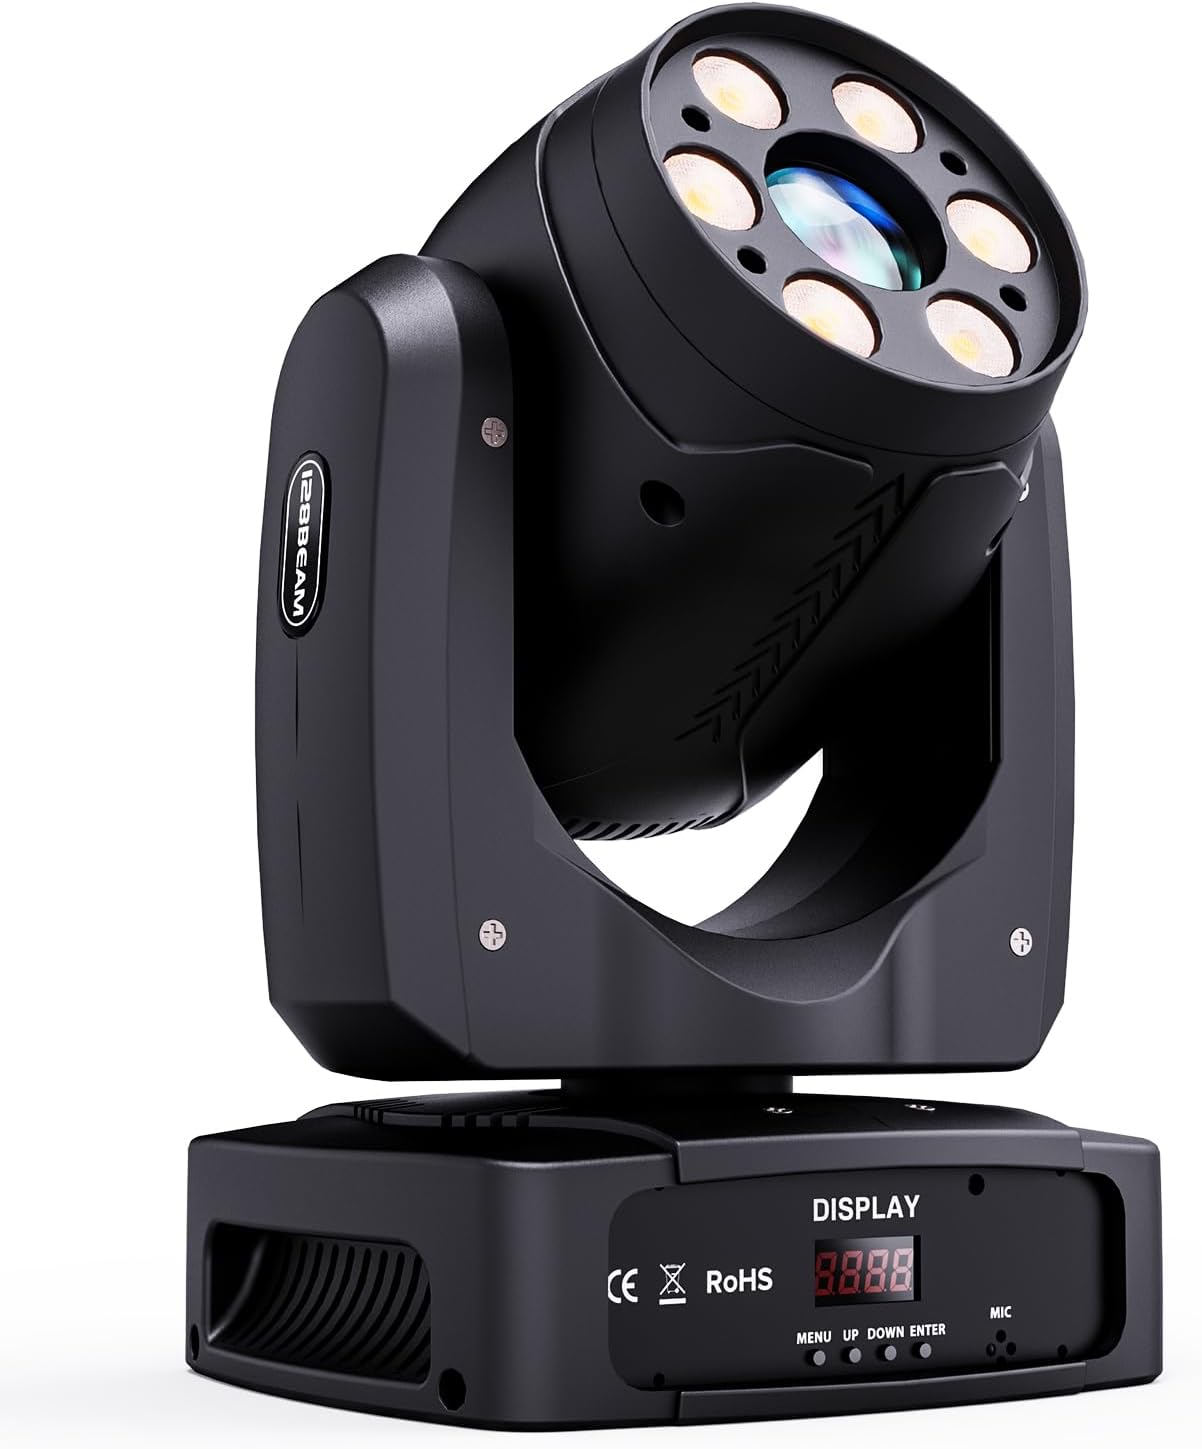 HOLDLAMP Moving Head DJ Lights 100W Moving Head Stage Light with 3-Facet Prism Gobos and 7 Colors Plus One Open LED Beam Lighting by Sound Activated DMX Control for Wedding Party Church